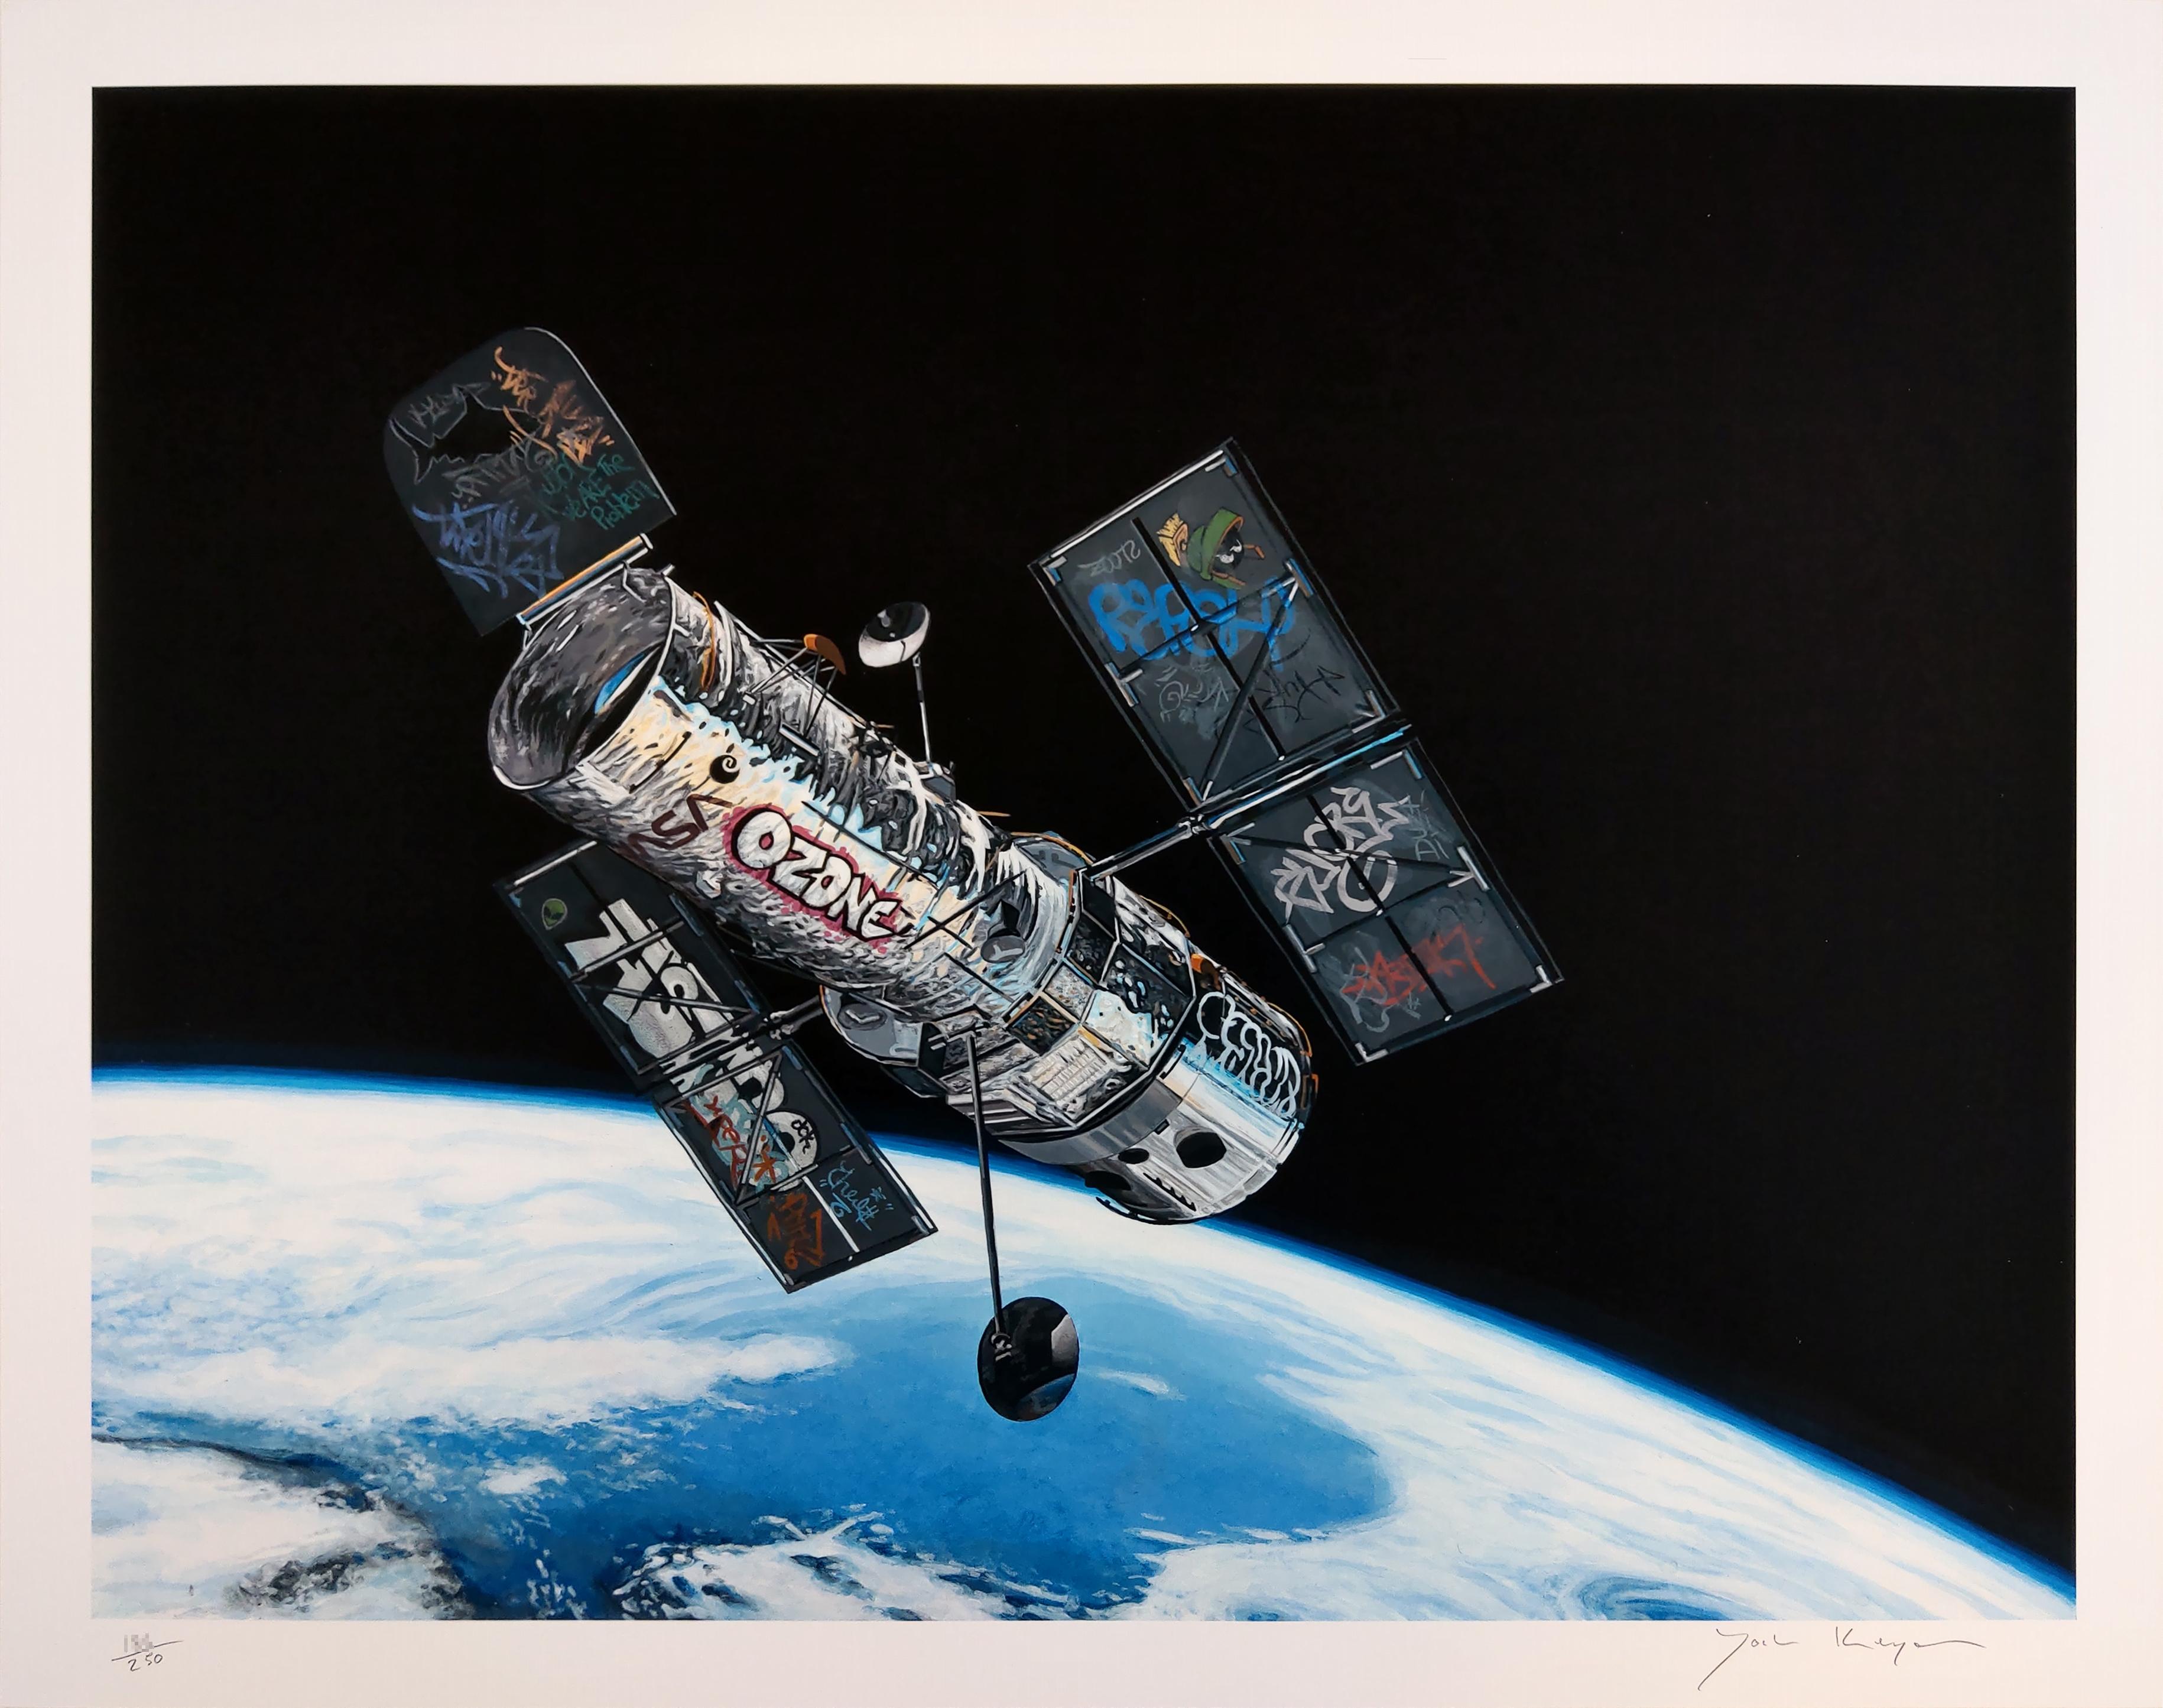 "Frontier I" by Josh Keyes. Hand signed and numbered by the artist. Limited Edition of 250. 

"The conception of both paintings rattled inside my mind for a few months before the image gelled. I spent some time watching footage of NASA missions and